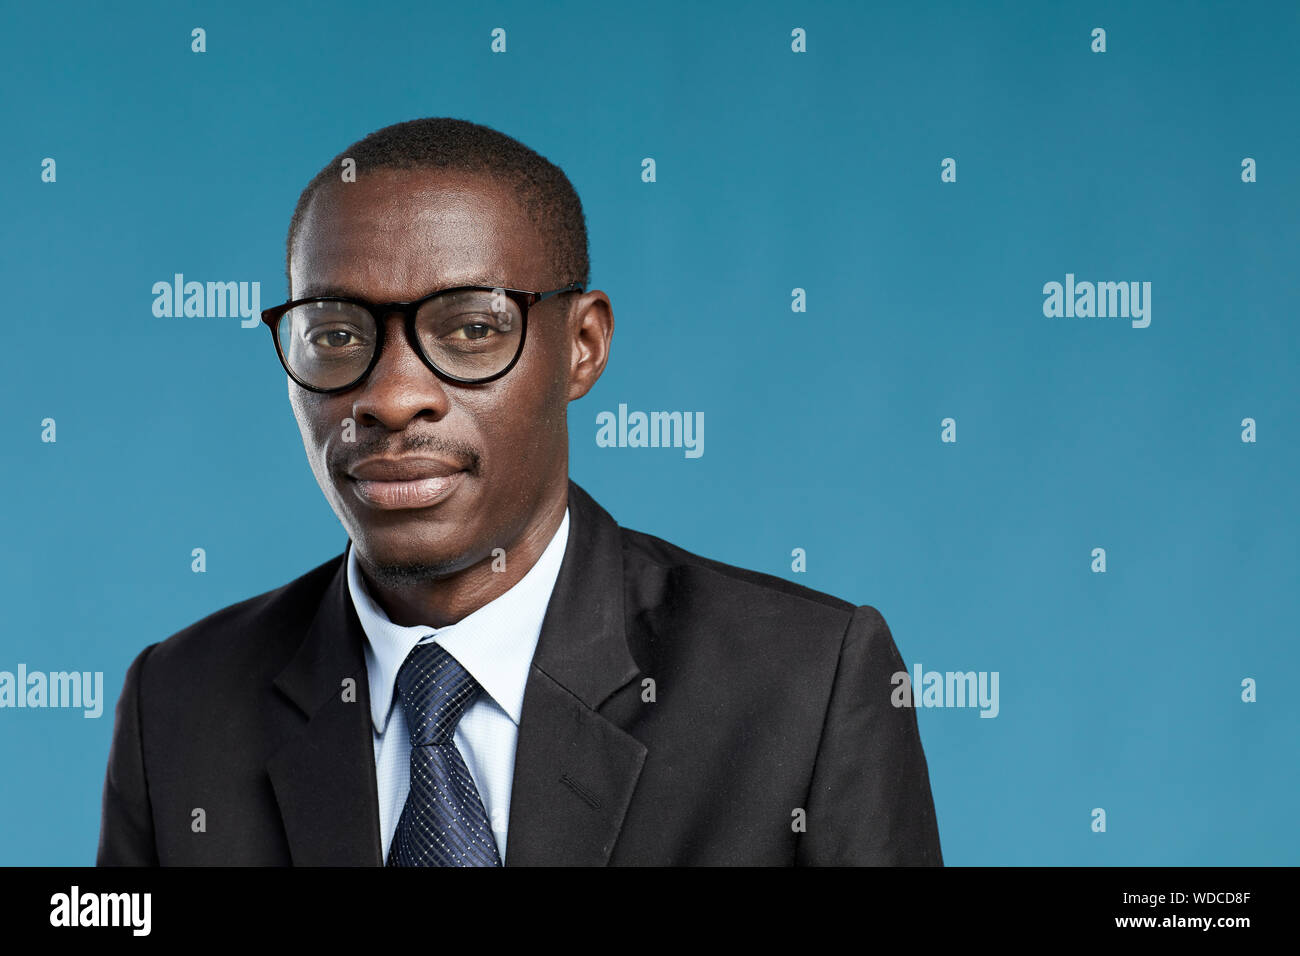 Portrait of young African businessman in eyeglasses and suit looking at camera isolated on blue background Stock Photo